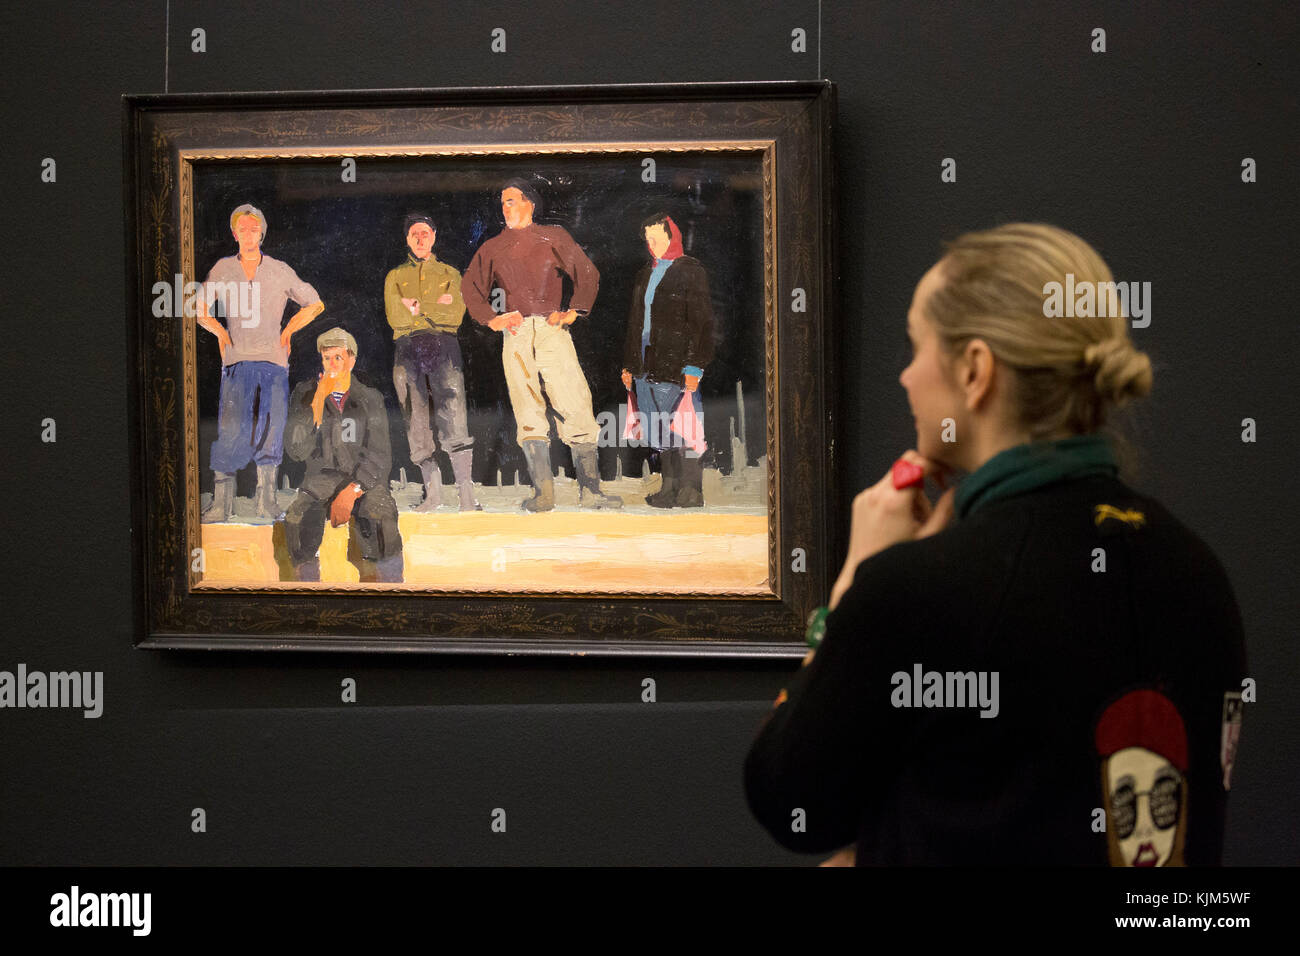 A visitor looks at 'Study for Builders of Bratsk' by Viktor Popkov, 1950s, (est. £8,000-12,000) which forms part of Sotheby's Inaugural Sale of Art from the USSR in London to coincide with the 100th Anniversary of the 1917 Russian Revolution. Stock Photo